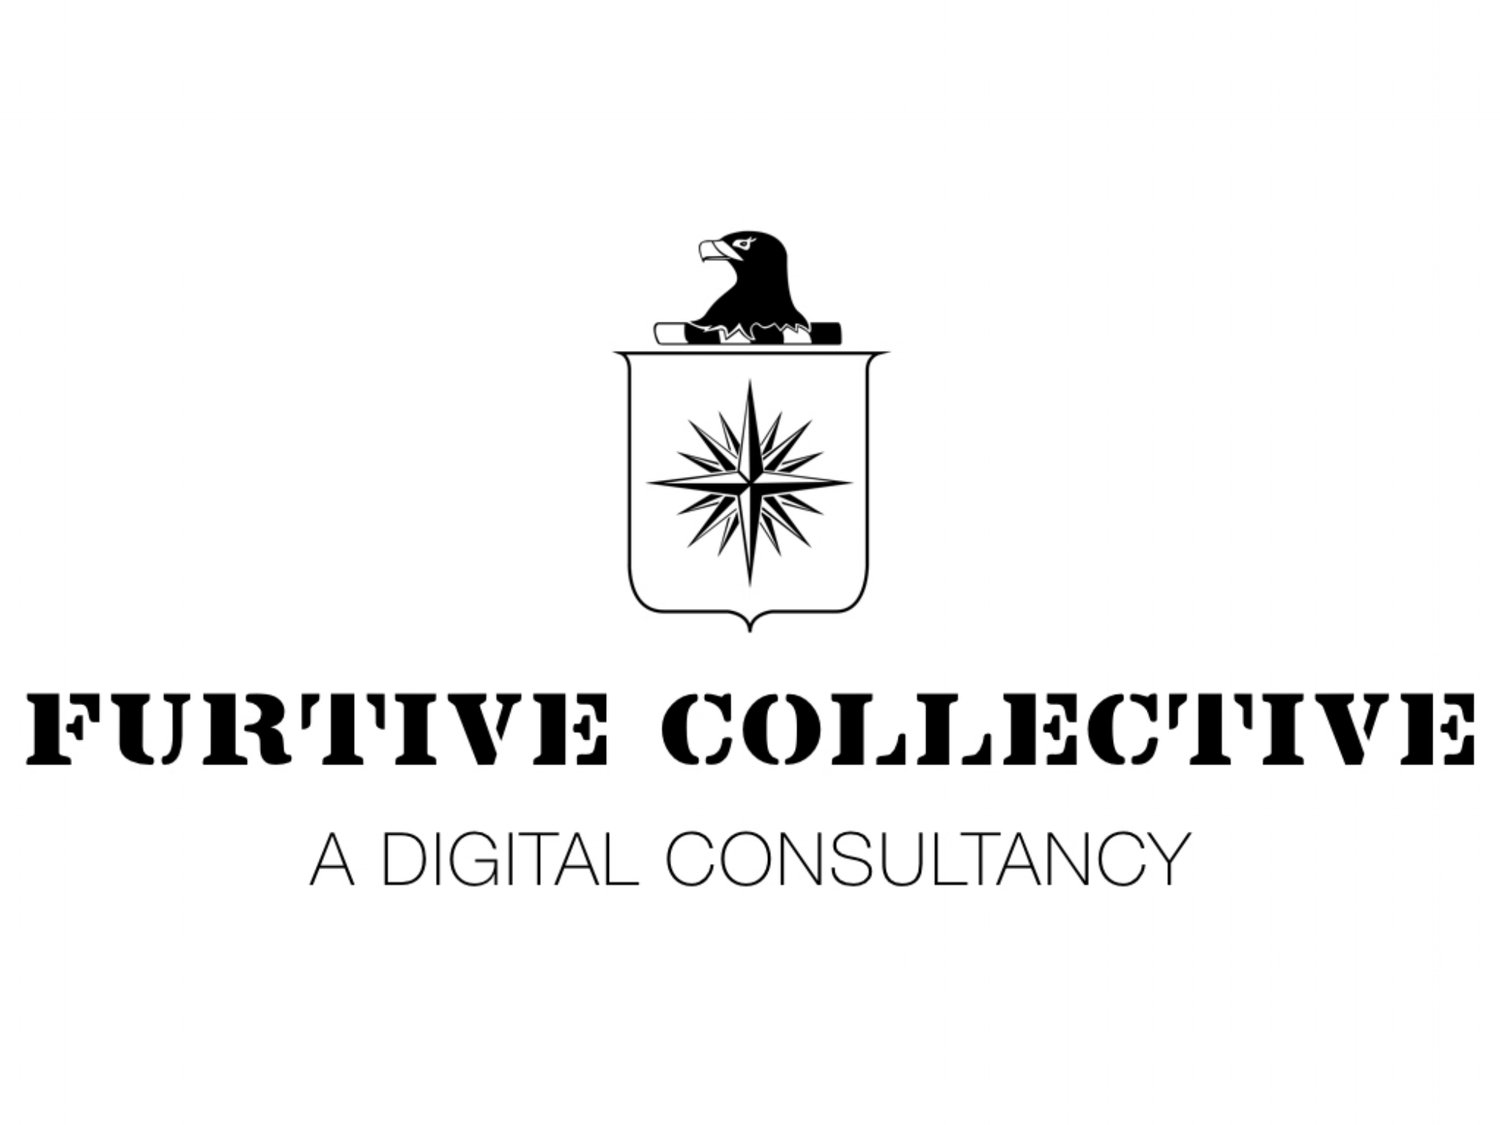 FURTIVE COLLECTIVE